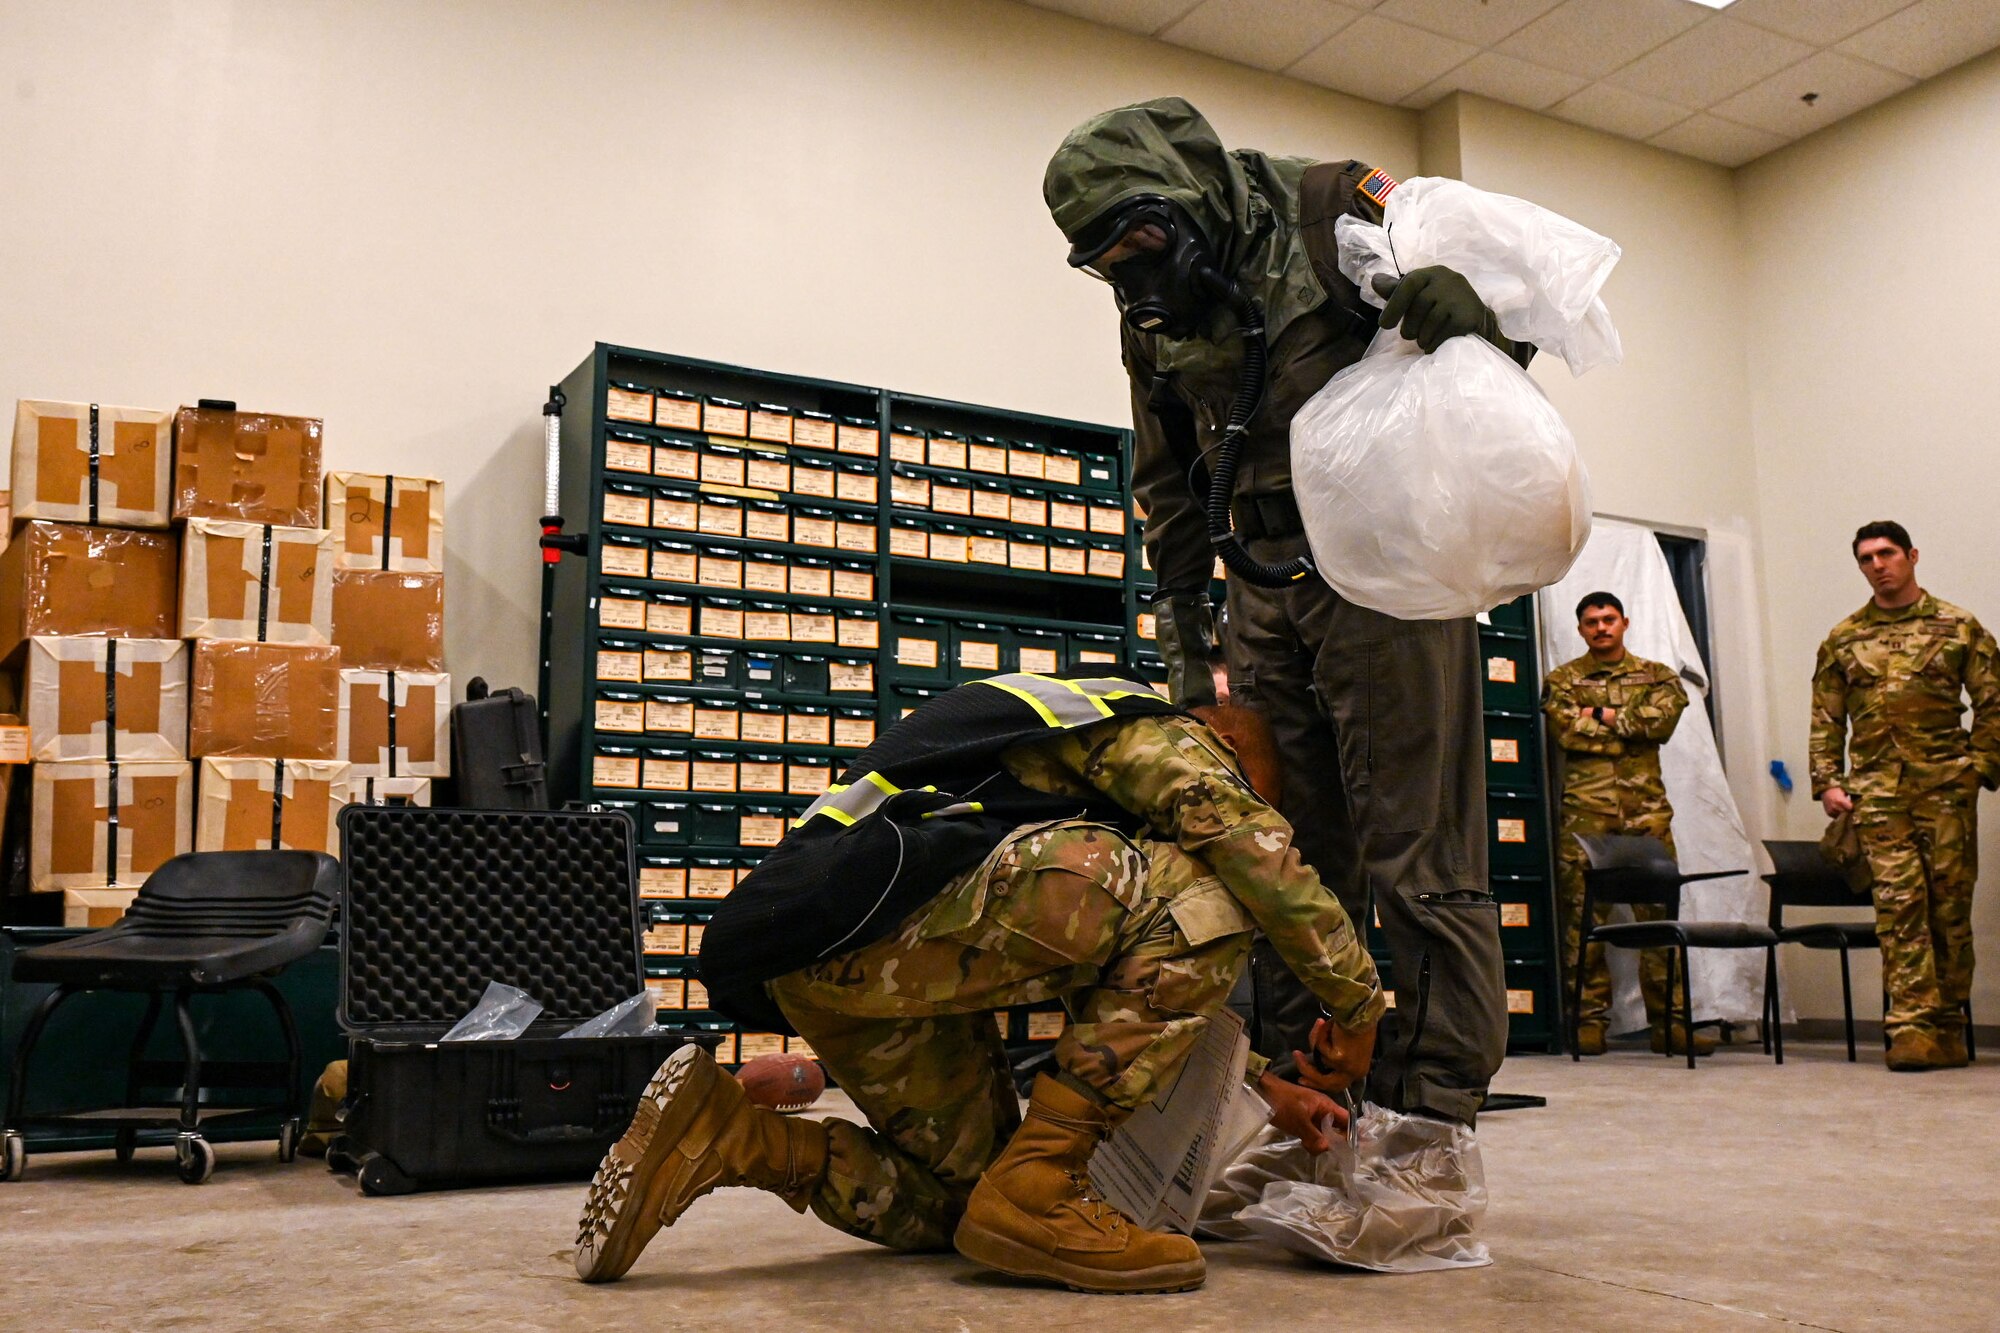 An Airman is kneeling and checking the fit of chemical safety gear around the ankles of a standing Airman.